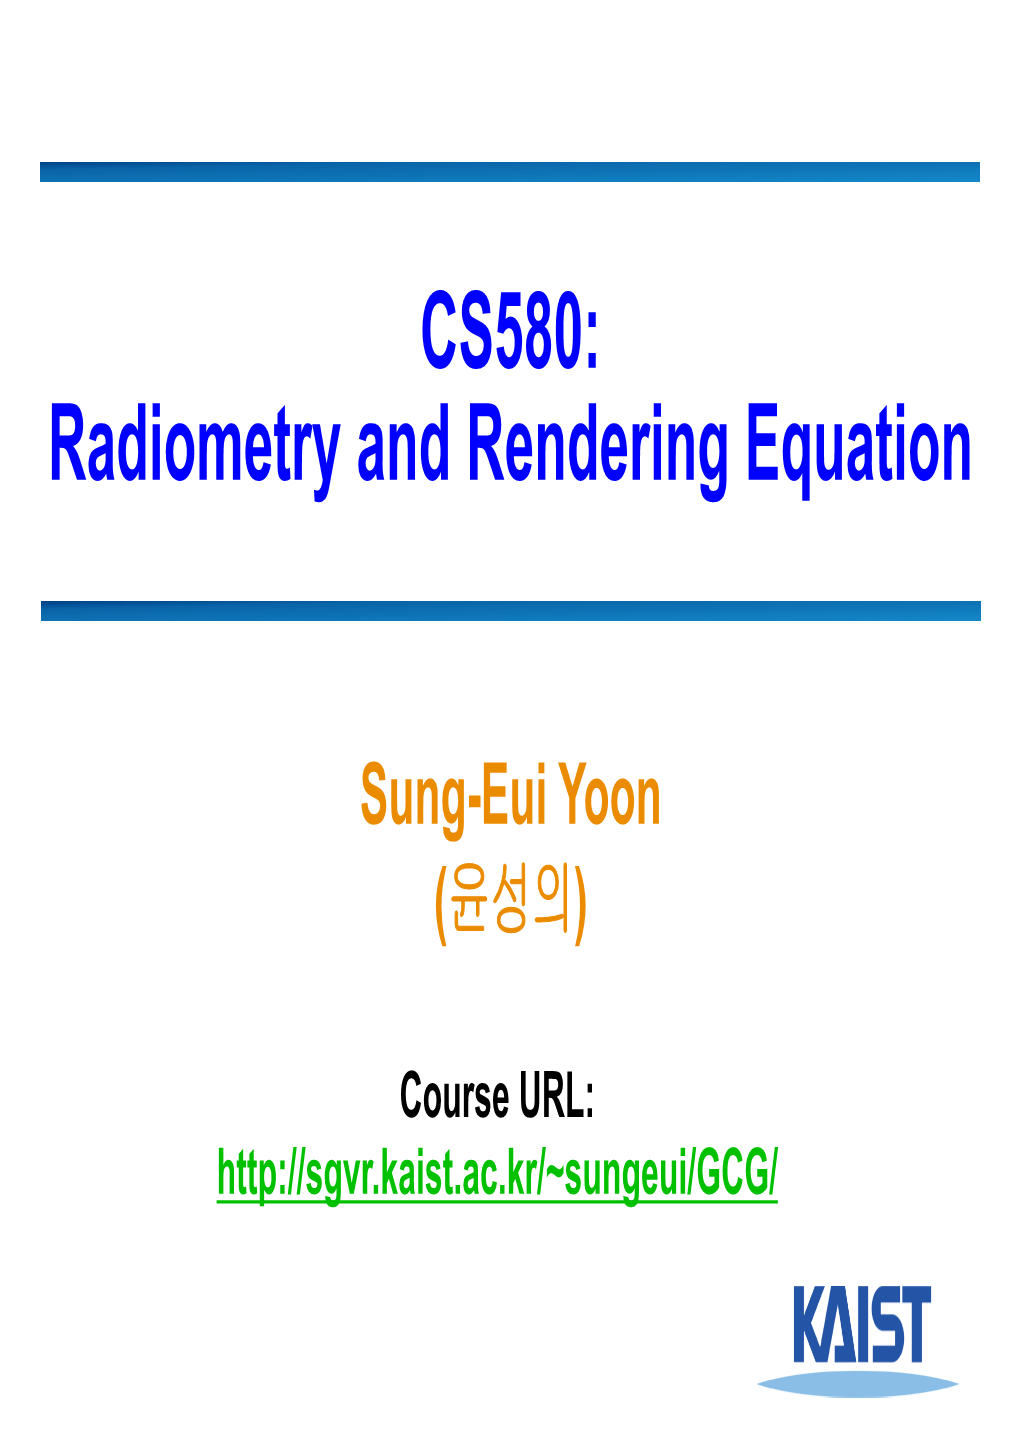 Radiometry and Rendering Equation